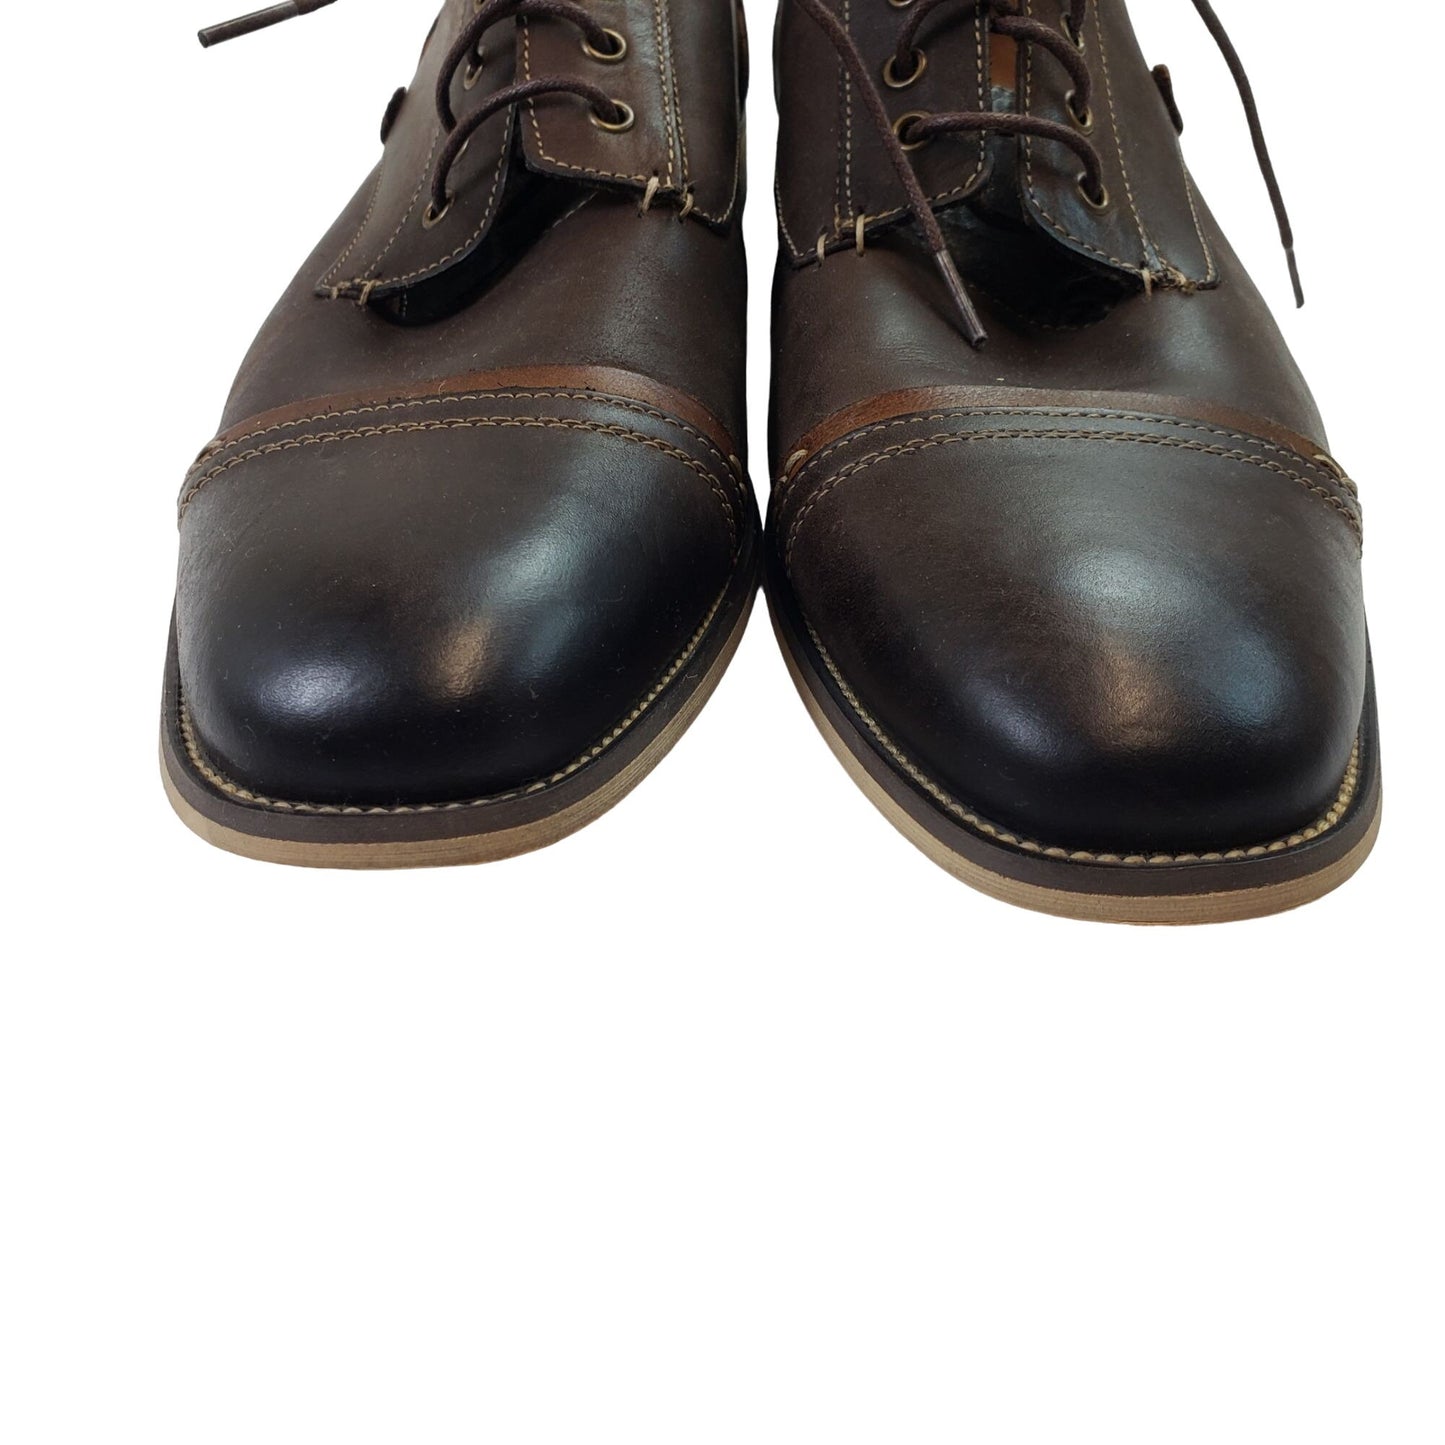 Steve Madden Krism Leather Oxford Shoes Size 12